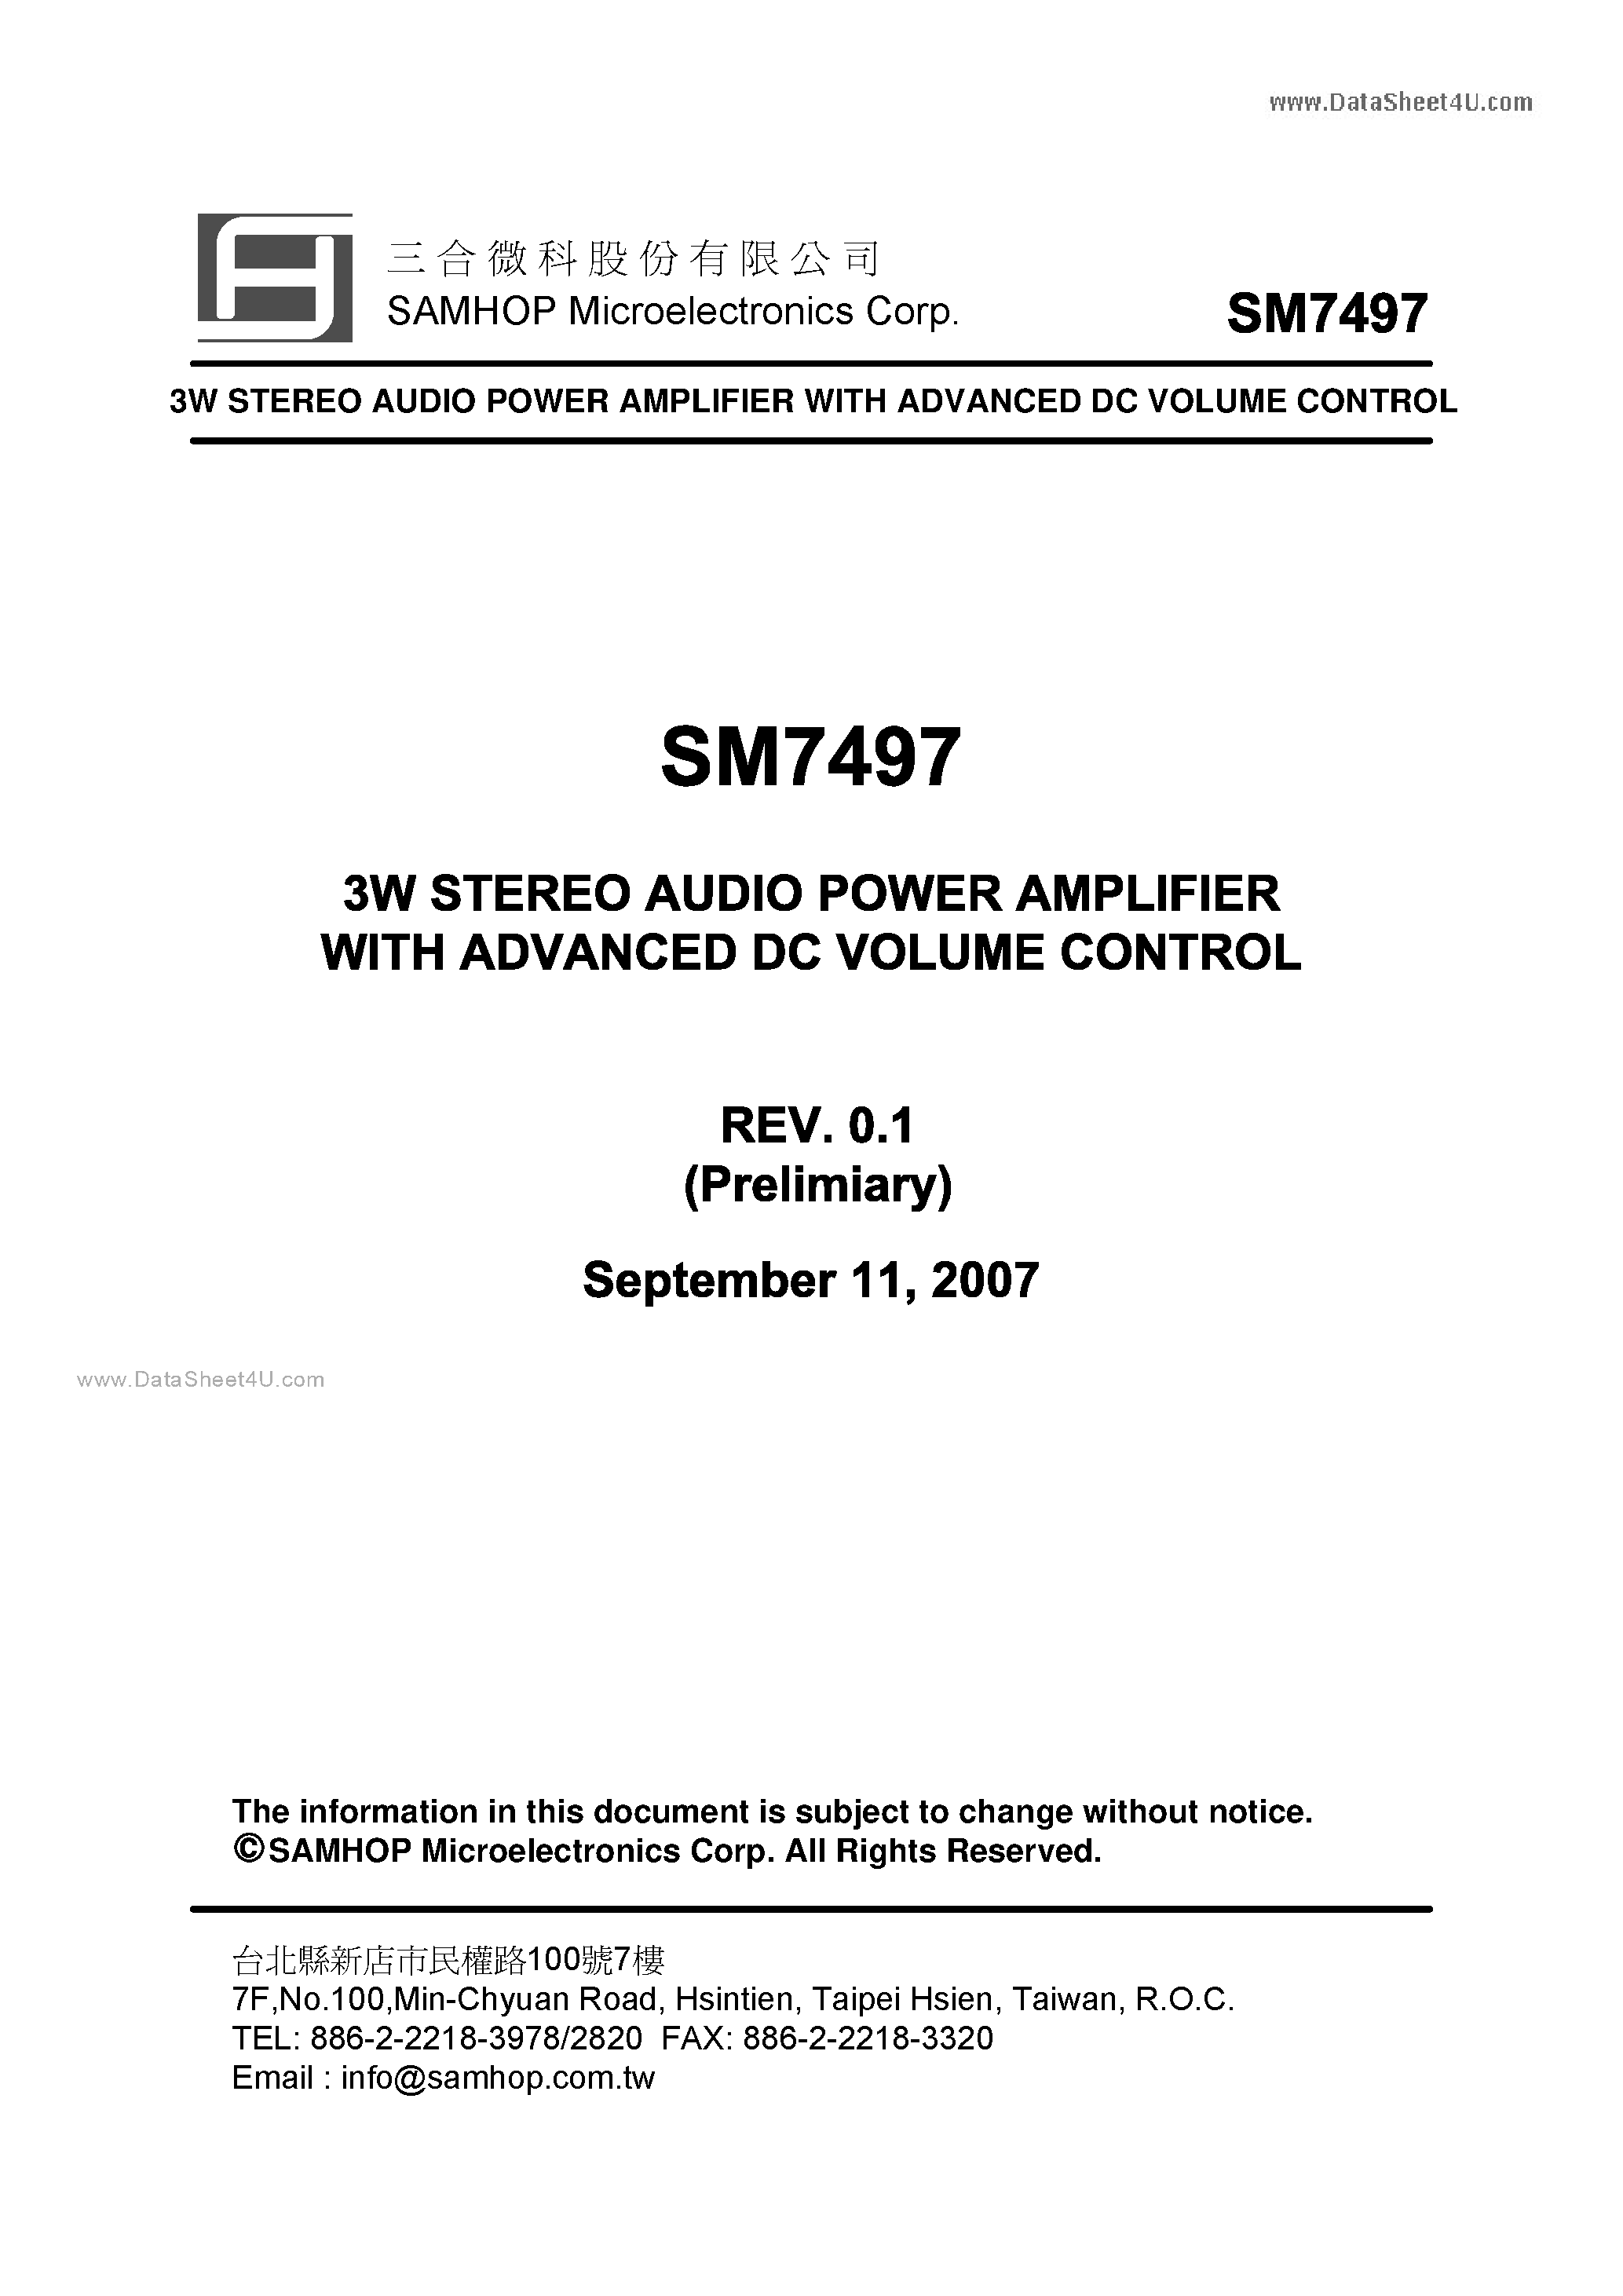 Datasheet SM7497 - 3W STEREO AUDIO POWER AMPLIFIER page 1